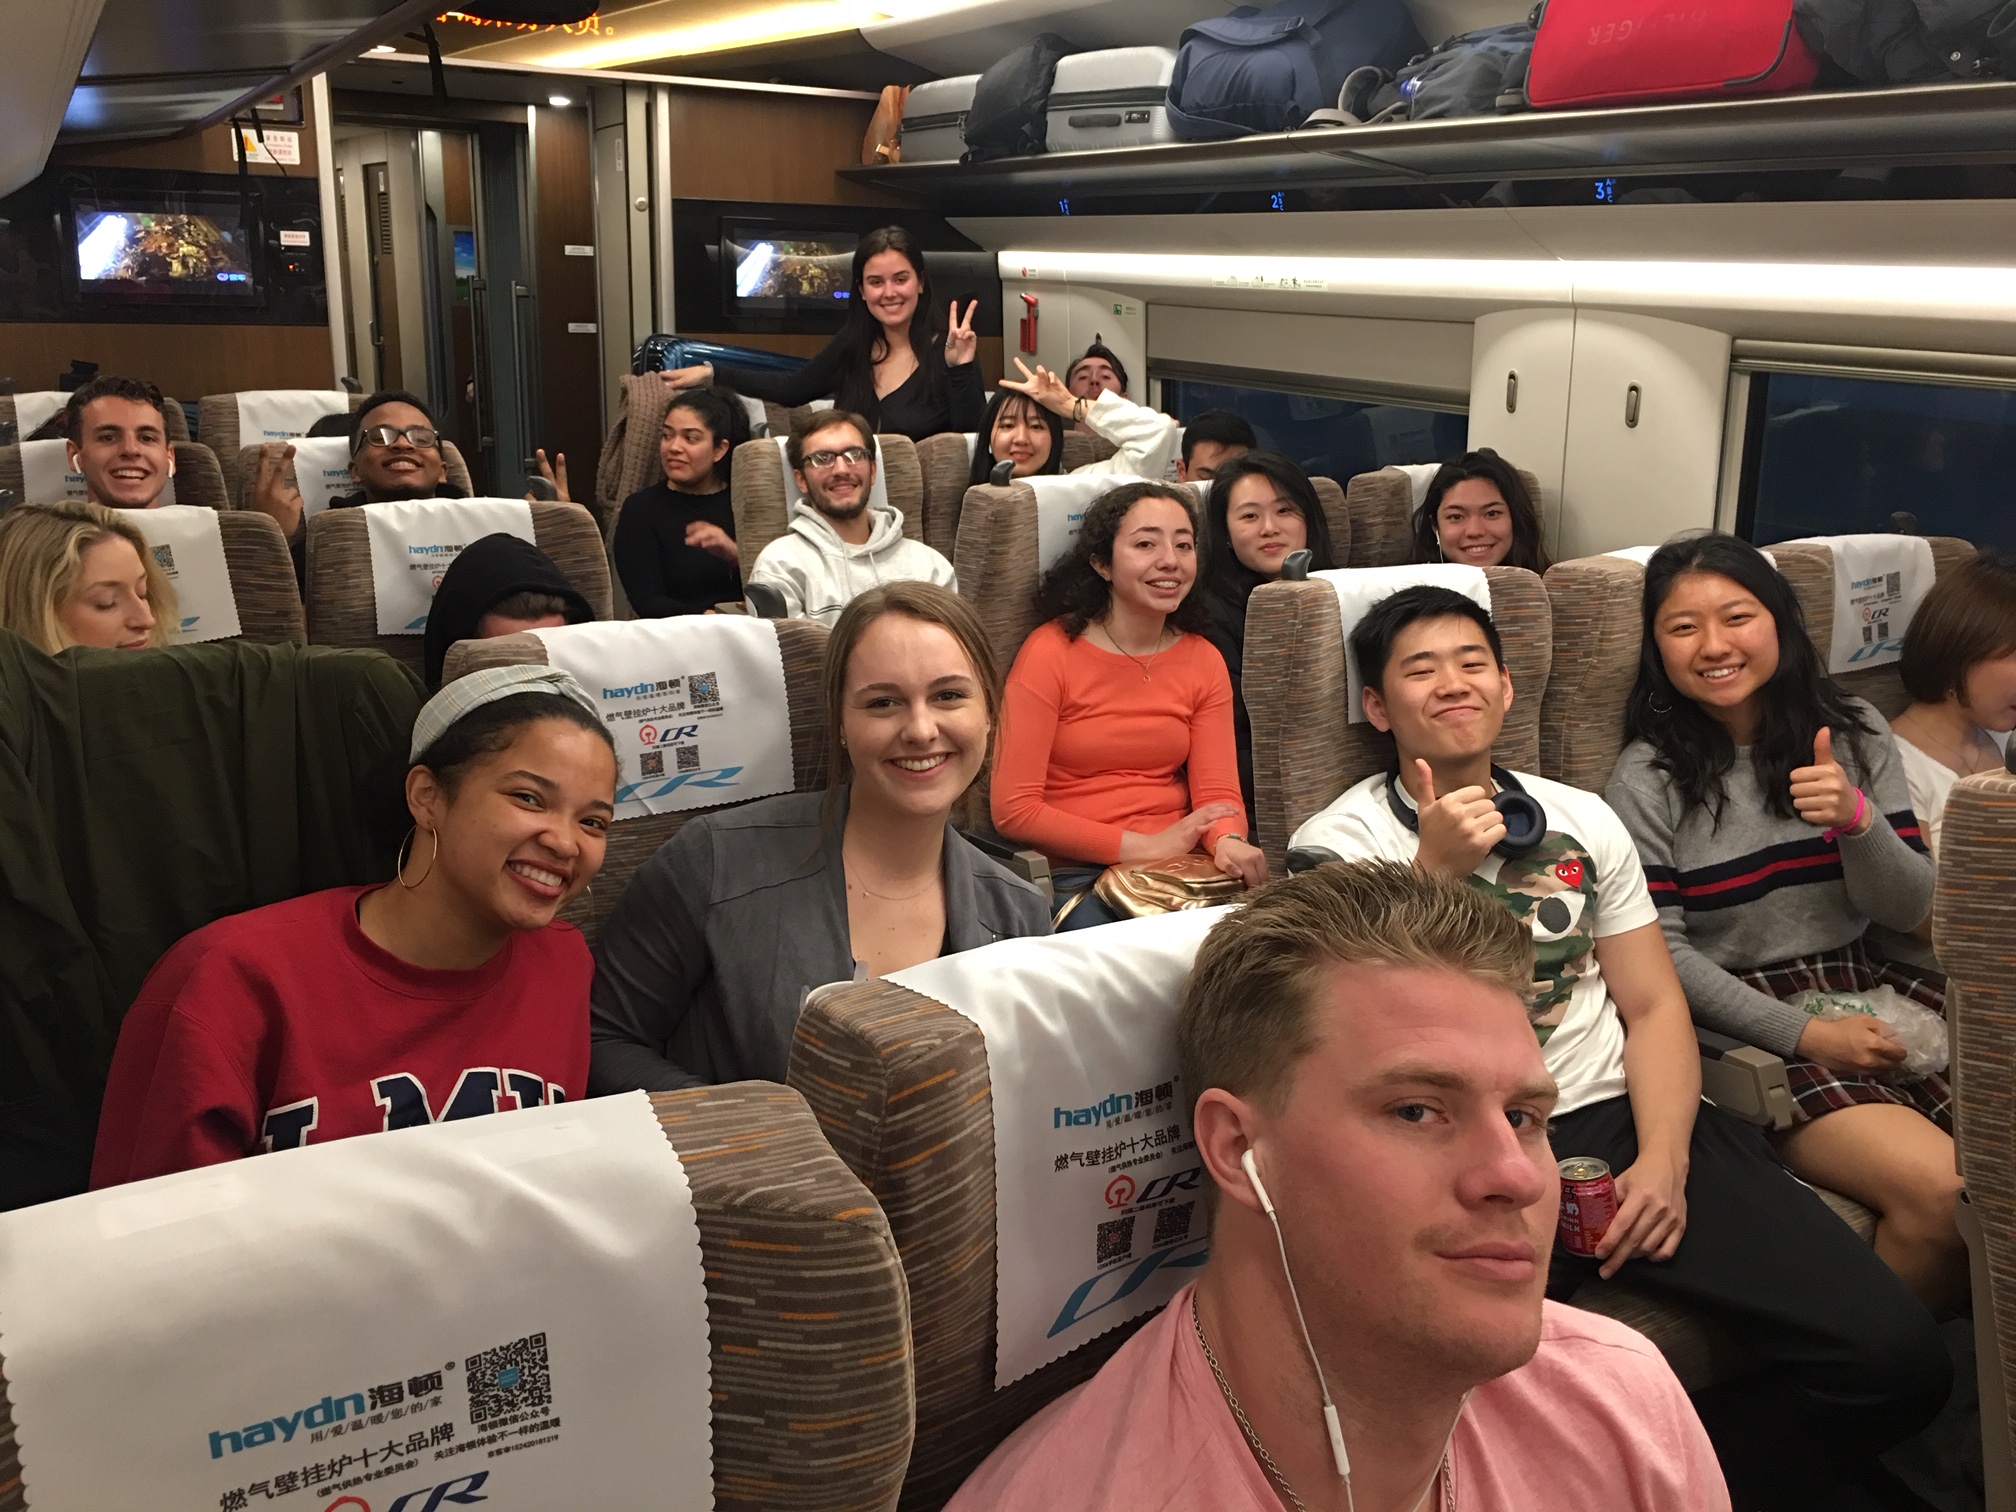 China Immersion students on a packed train.